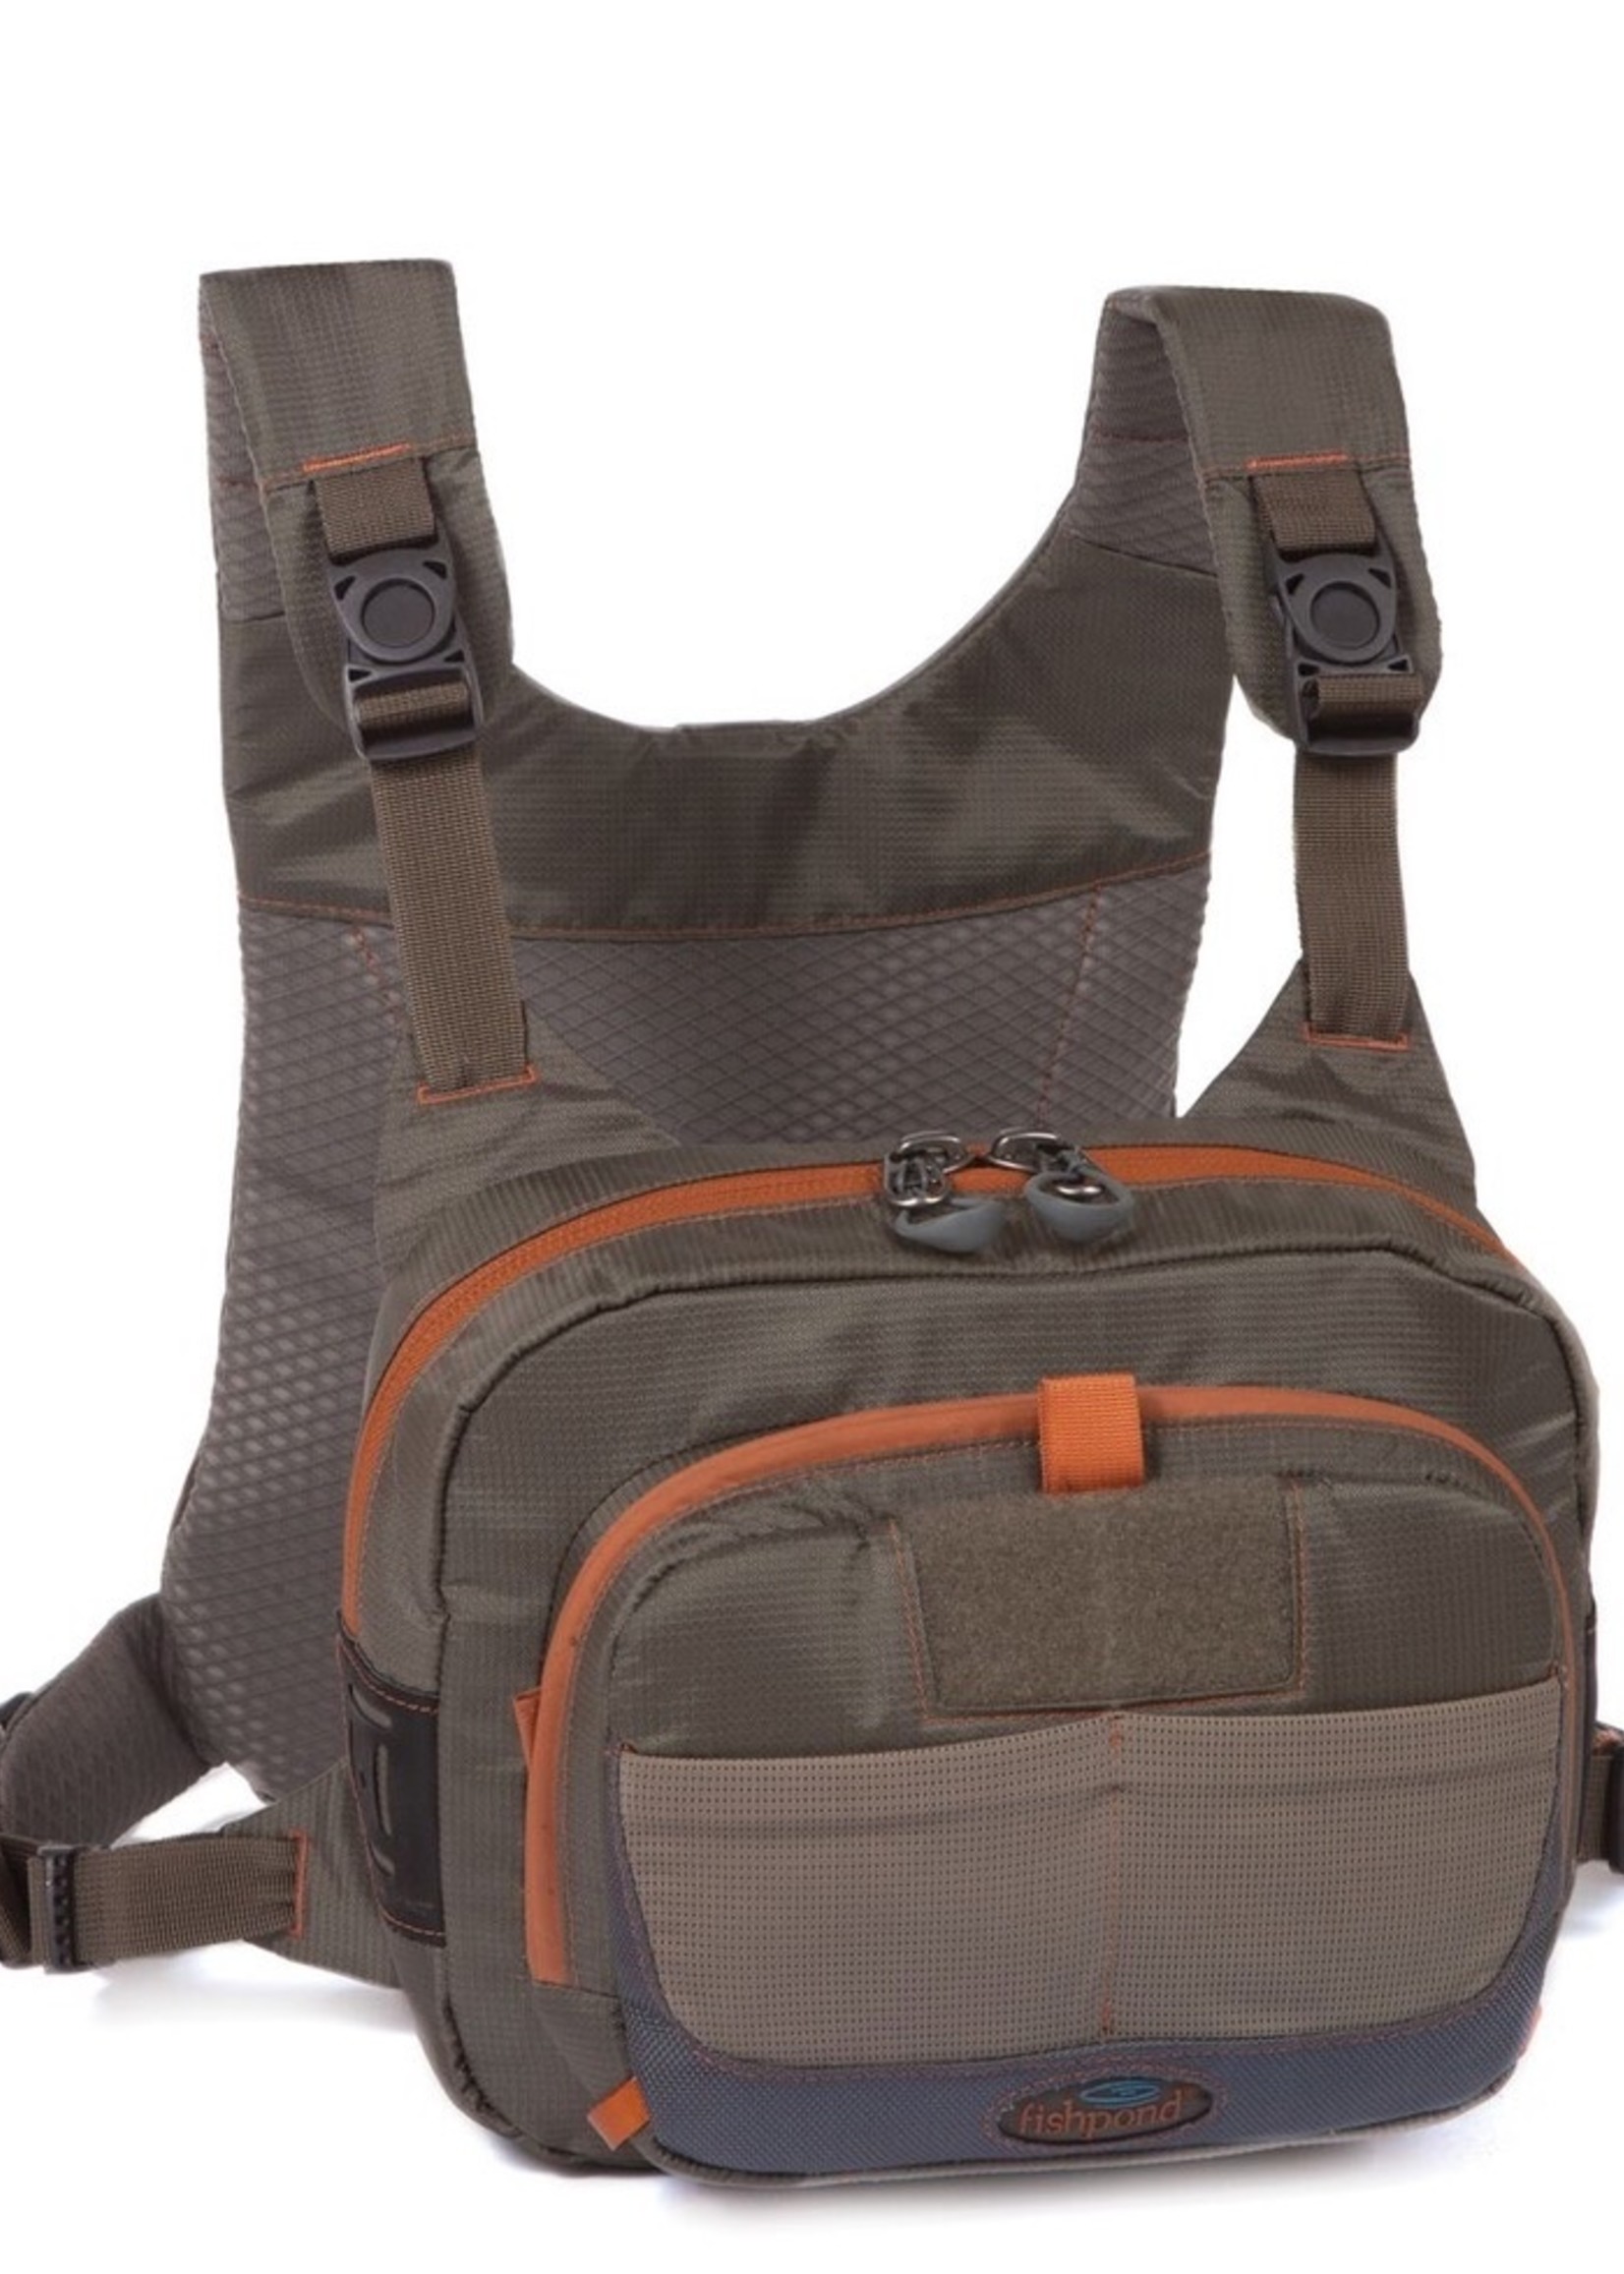 FISHPOND CROSS-CURRENT CHEST PACK